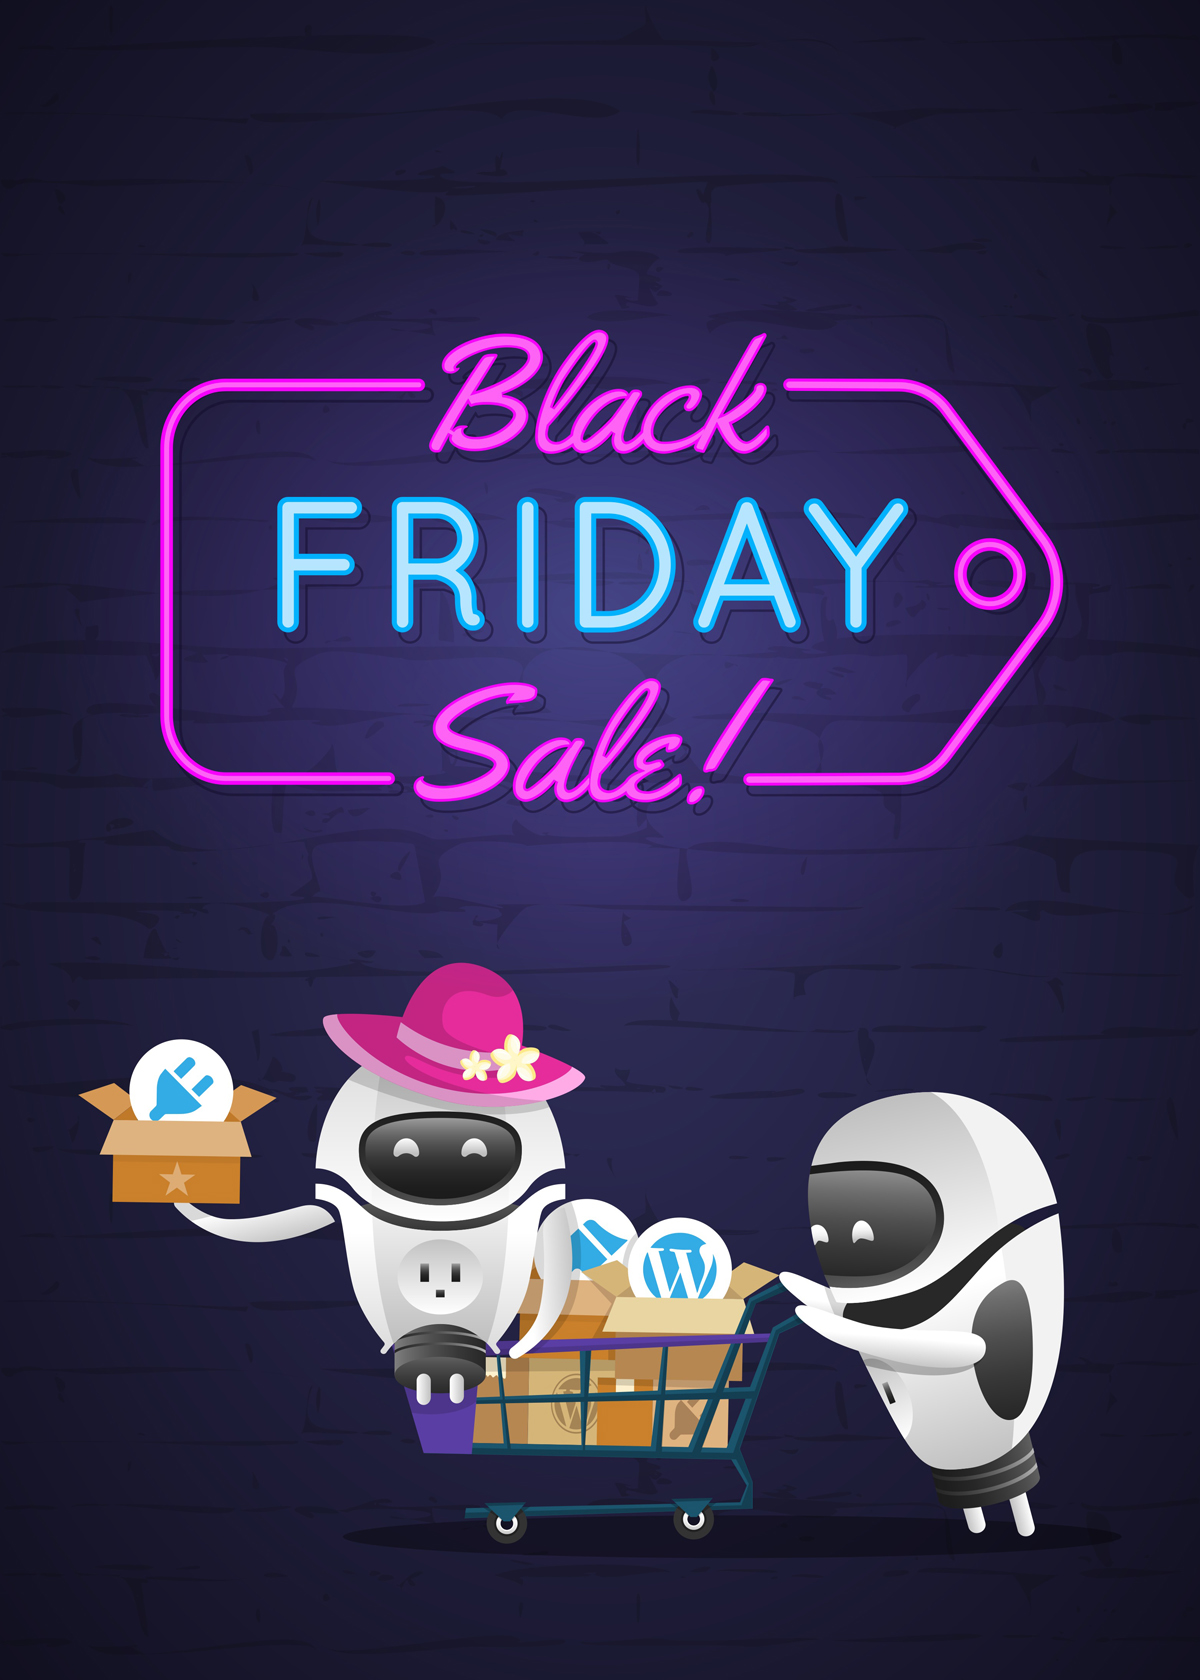 Black Friday Cyber Monday 2018 Special Offers By Freemius Partners